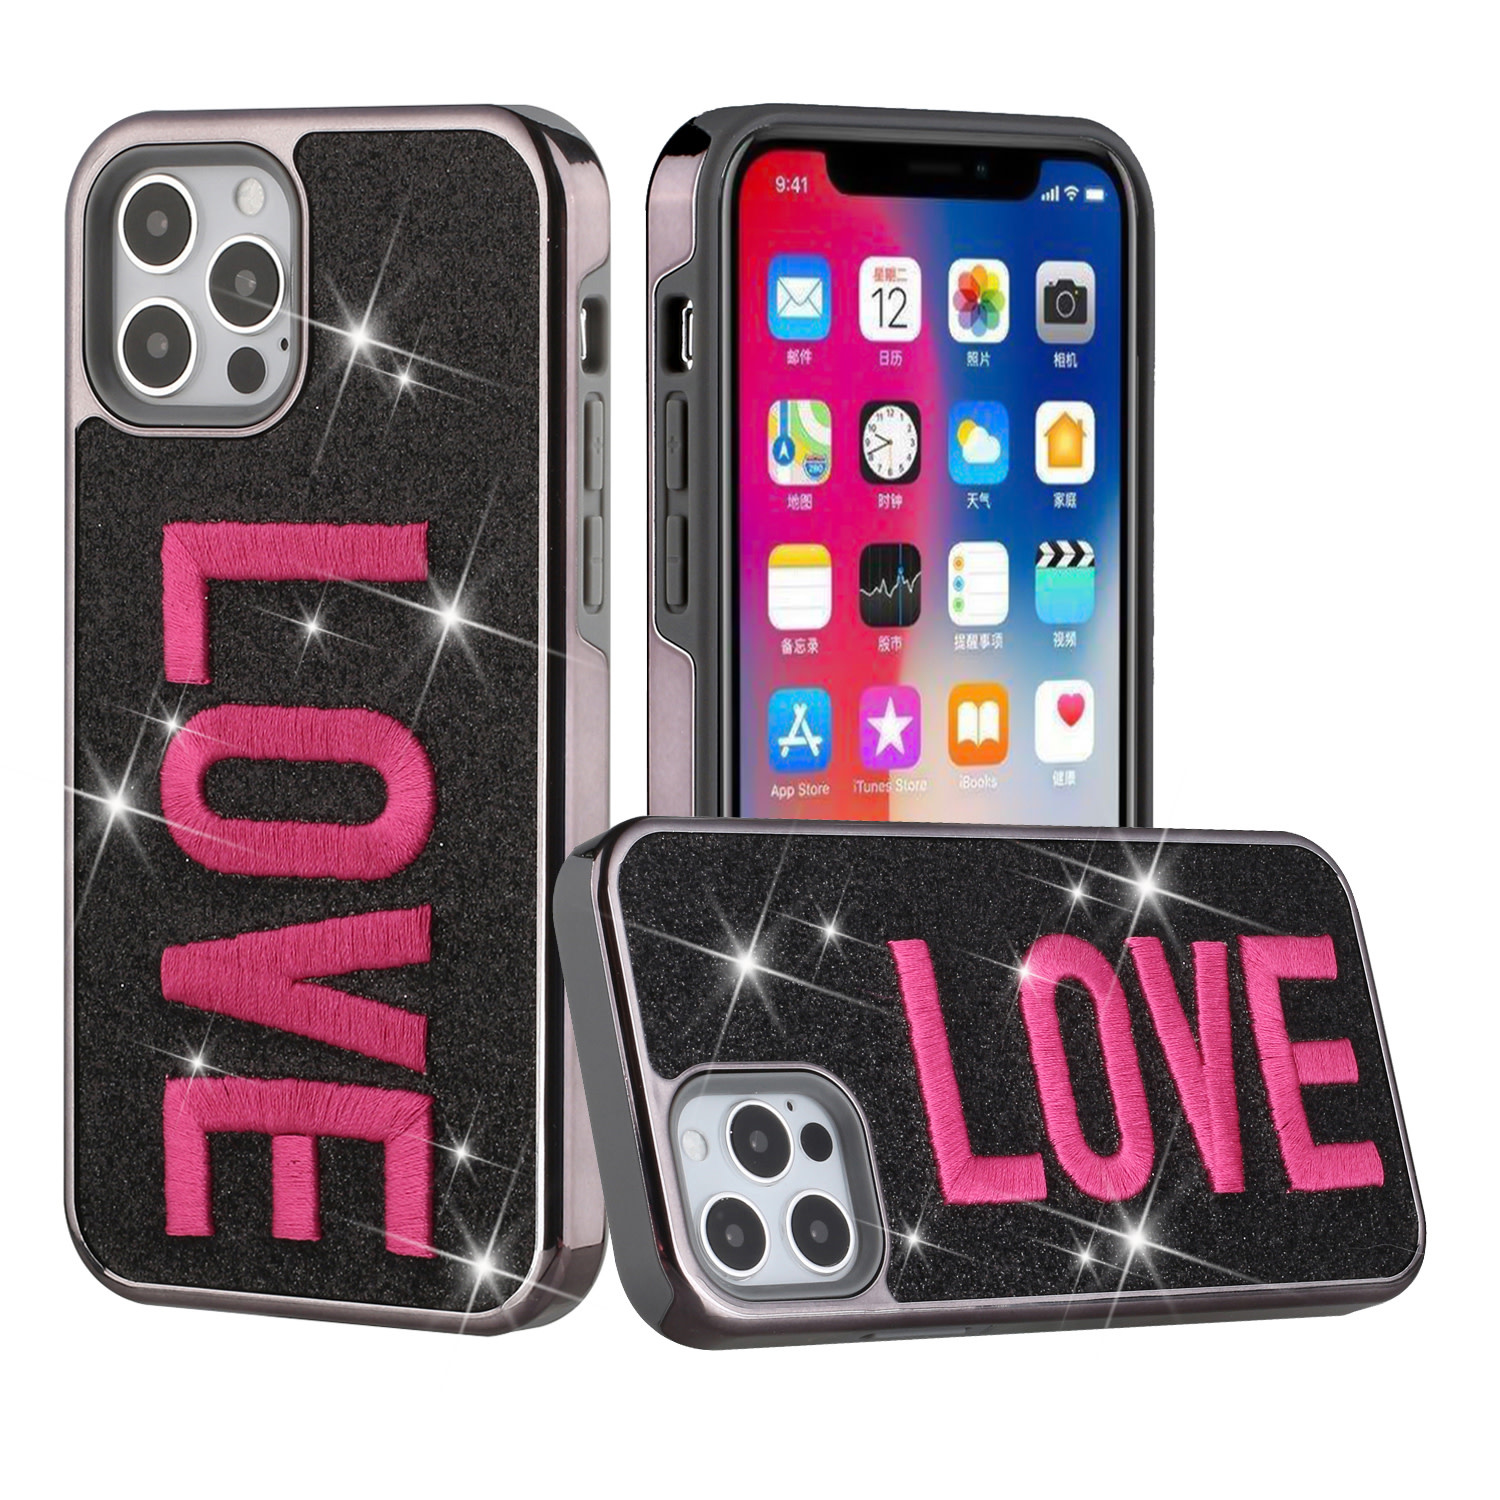 For Apple iPhone 11 Pro Max 6.5 / XS Max Embroidery Bling Glitter Chrome Hybrid Case Cover